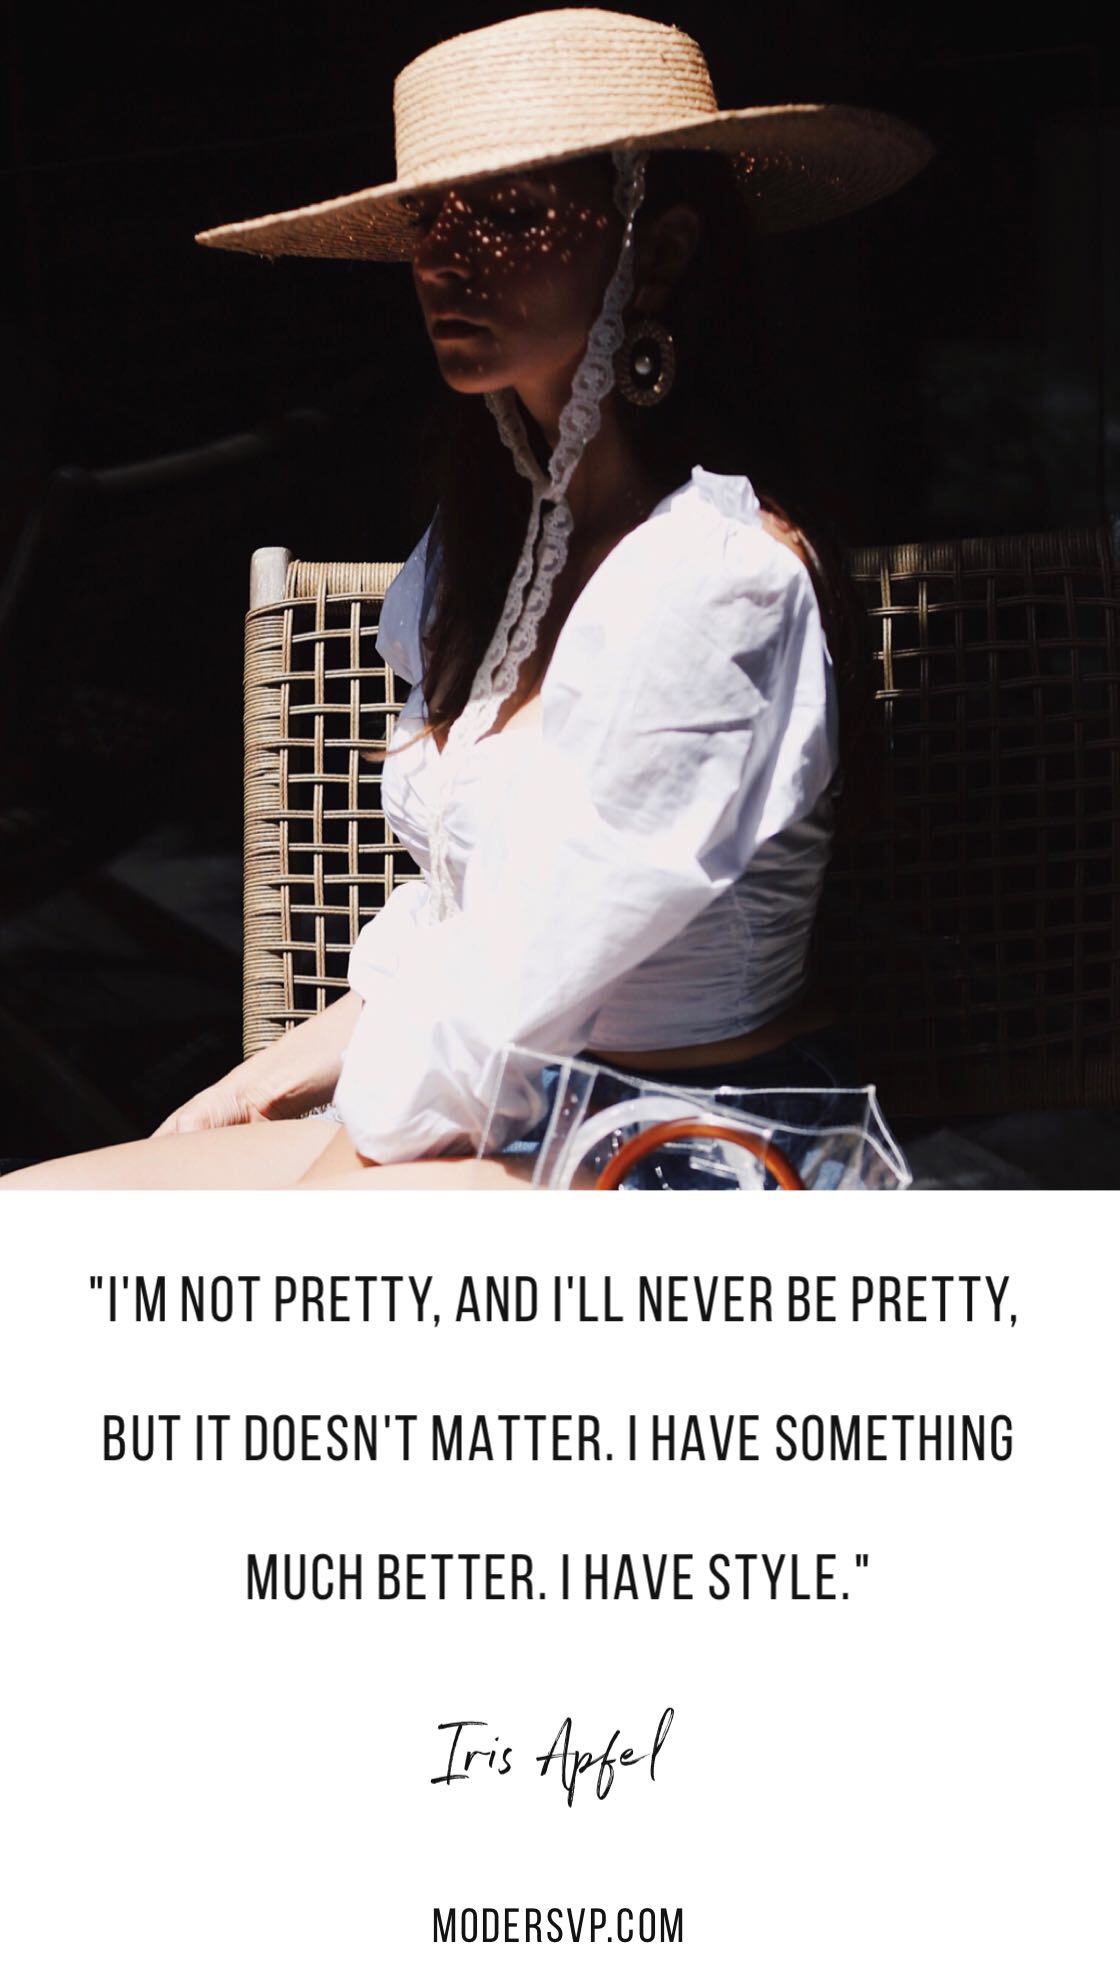 Best Style Quotes - Fashion Quotes - I'm not pretty and I'll never be pretty, but it doesn't matter. I have something much better. I have style and I am a hustler. Iris Apfel - Read more style quotes from Anna Wintour, Diane Von Furstenberg, Coco Chanel and other fashion designers and style icons on Houseofcomil.com